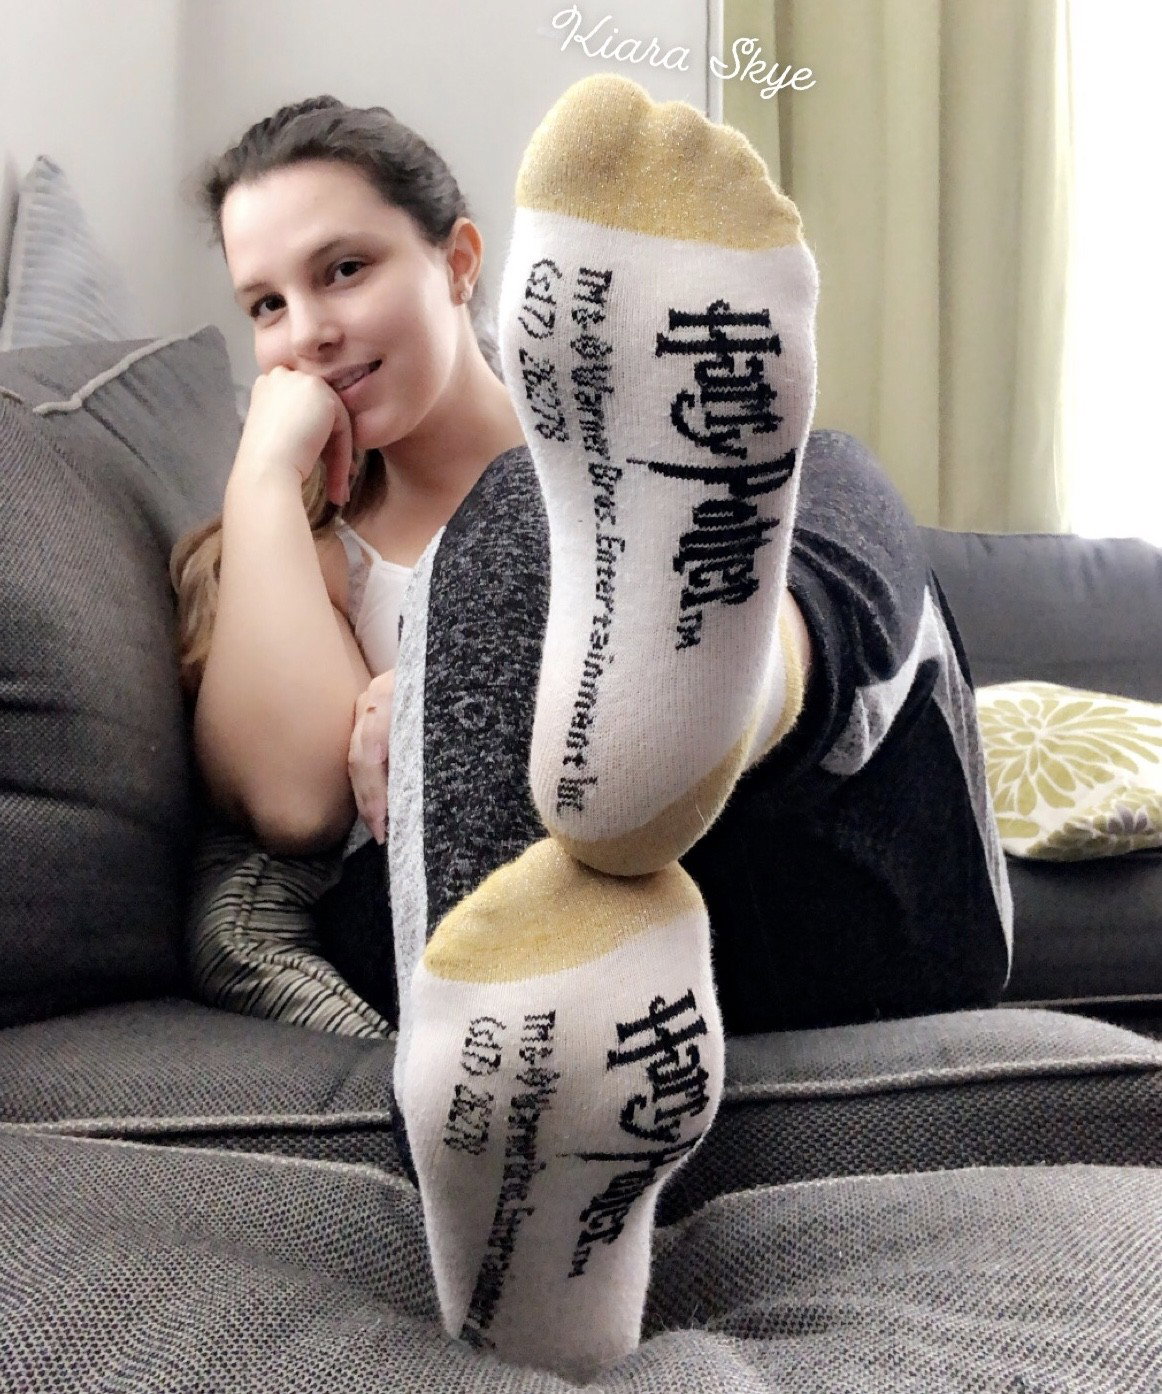 Photo by Kiara Skye with the username @KiaraSkye, who is a star user,  March 14, 2020 at 6:25 PM. The post is about the topic Hot Girls in Socks and the text says '😏 See more #socks and #boobs on https://kiarafans.com 🧦

🔥ONLY A FEW SUBS LEFT AT $7.99! HURRY!🔥

#feet #footfetish #brunette #queen #femdom #findom #humiliation #smellyfeet #foot #toes #soles #footqueen #domme'